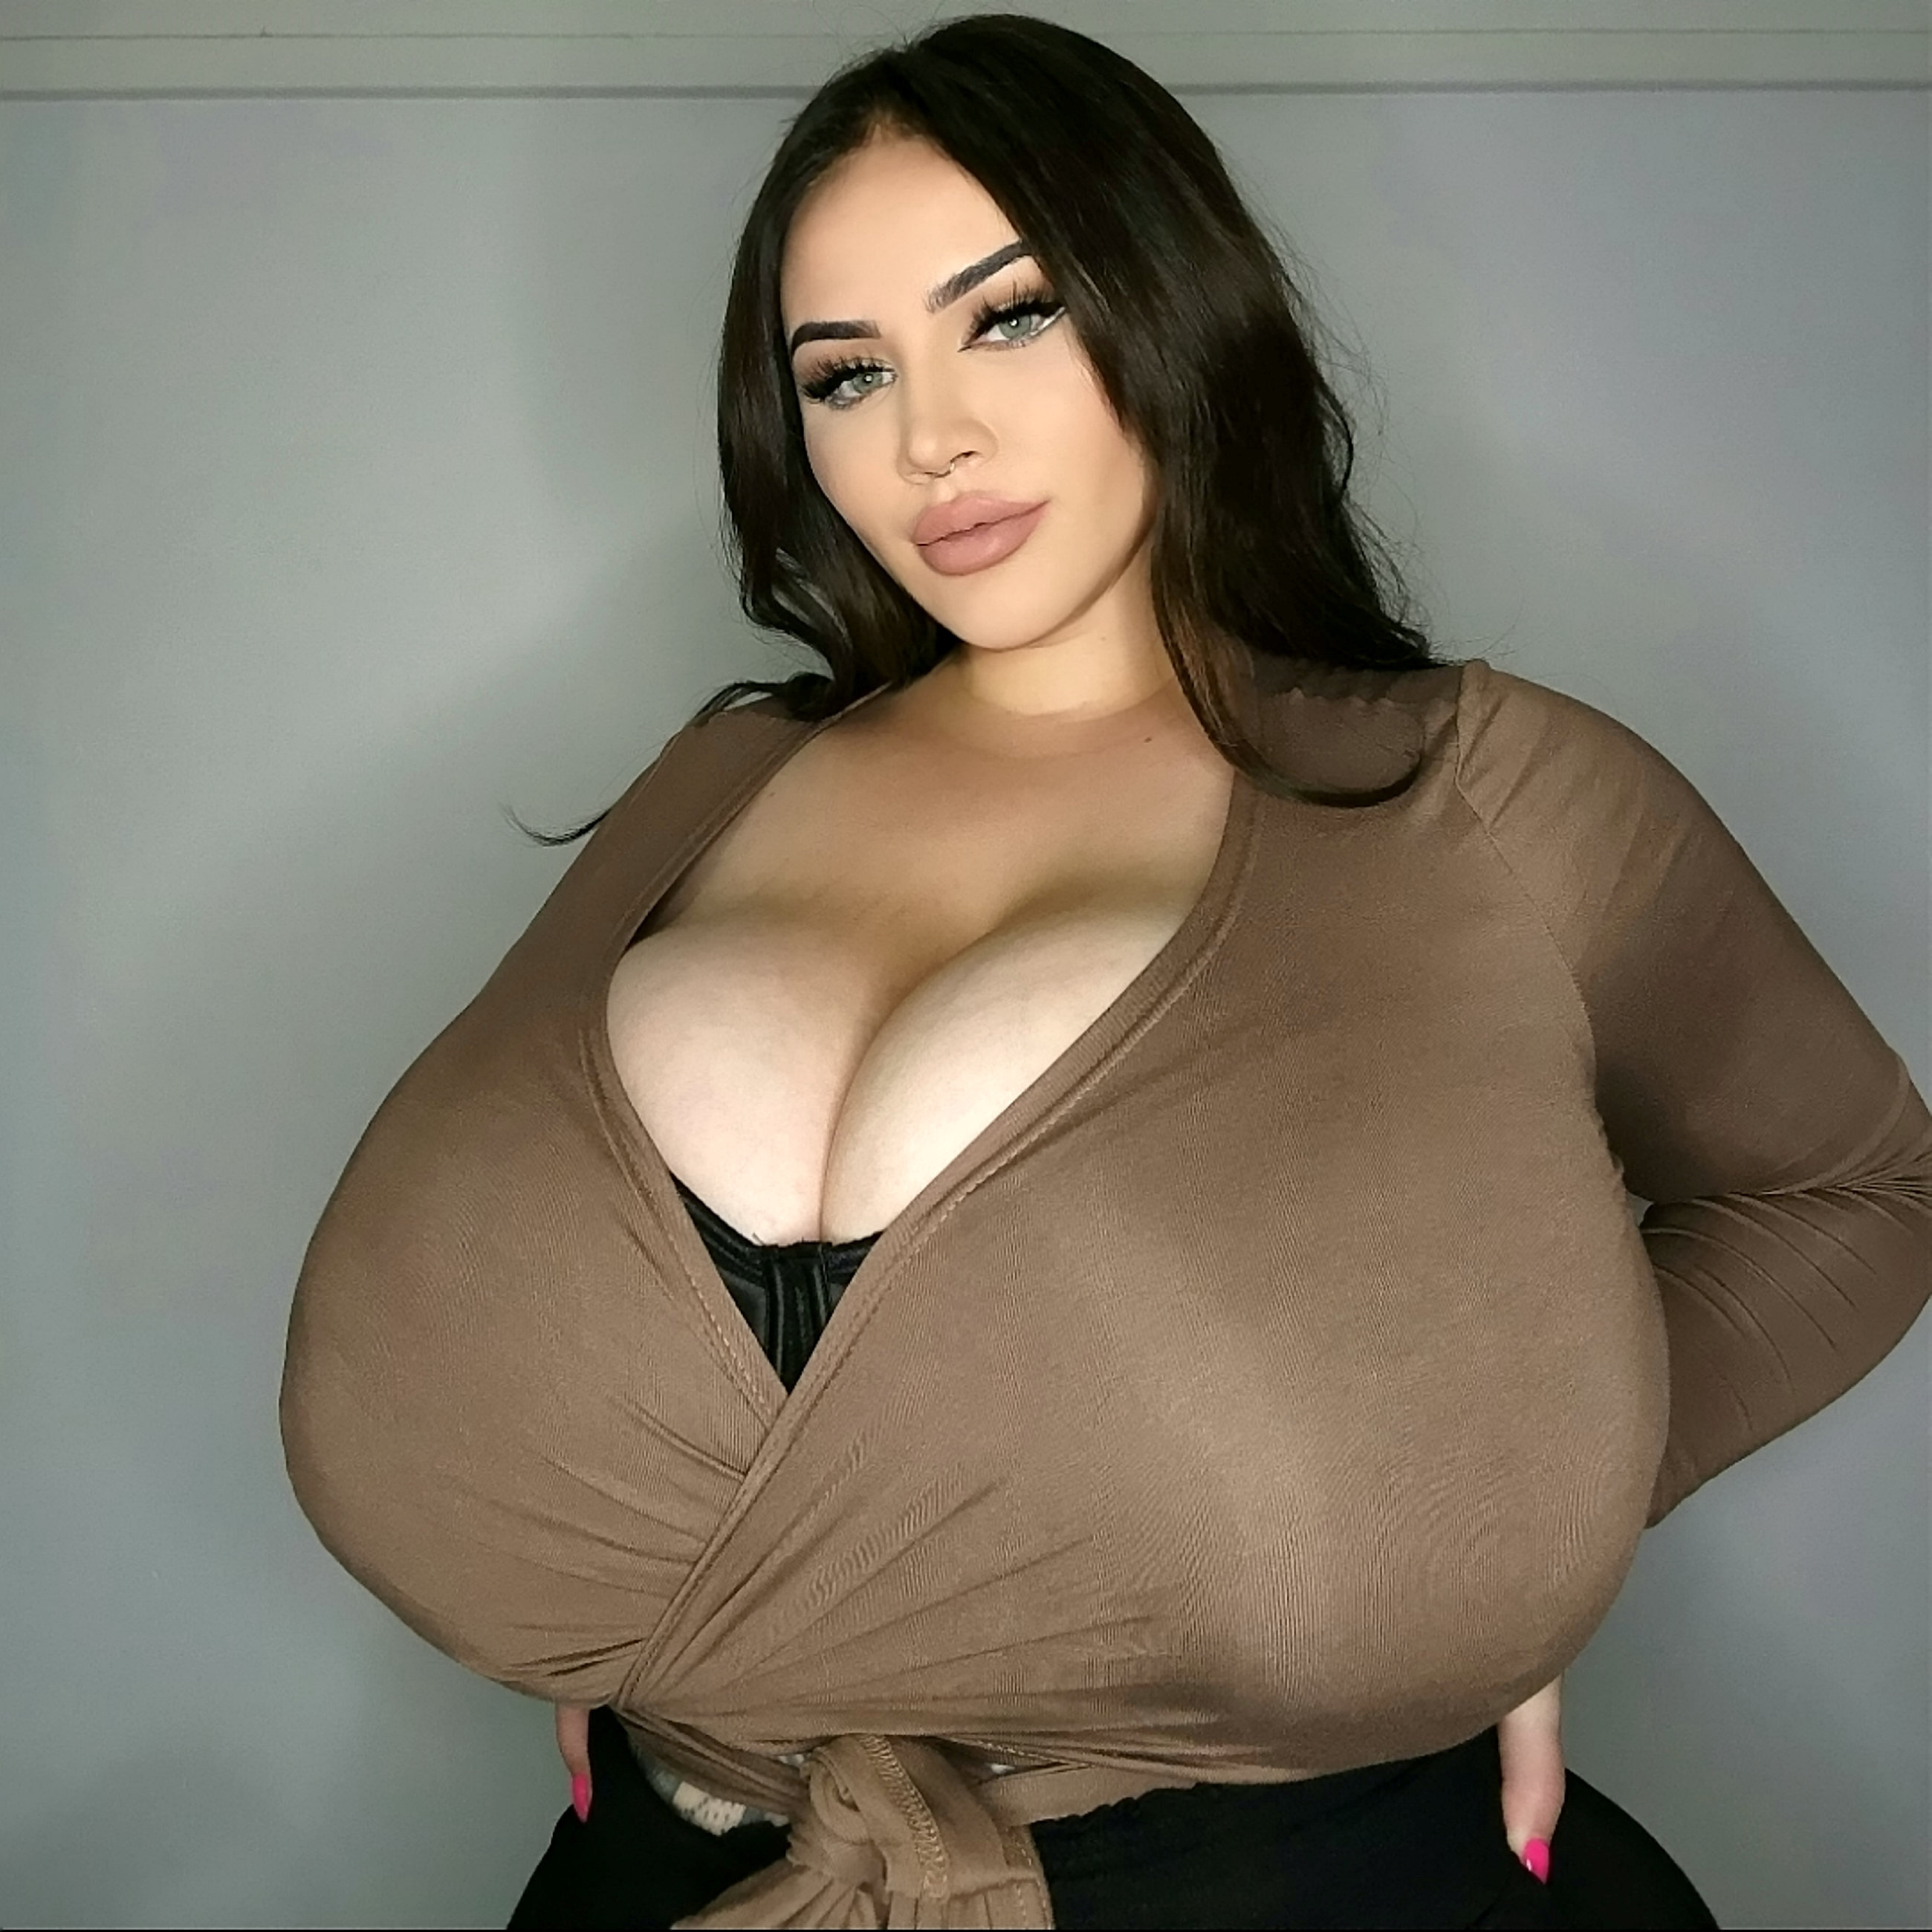 dina henderson recommends Big O Titties